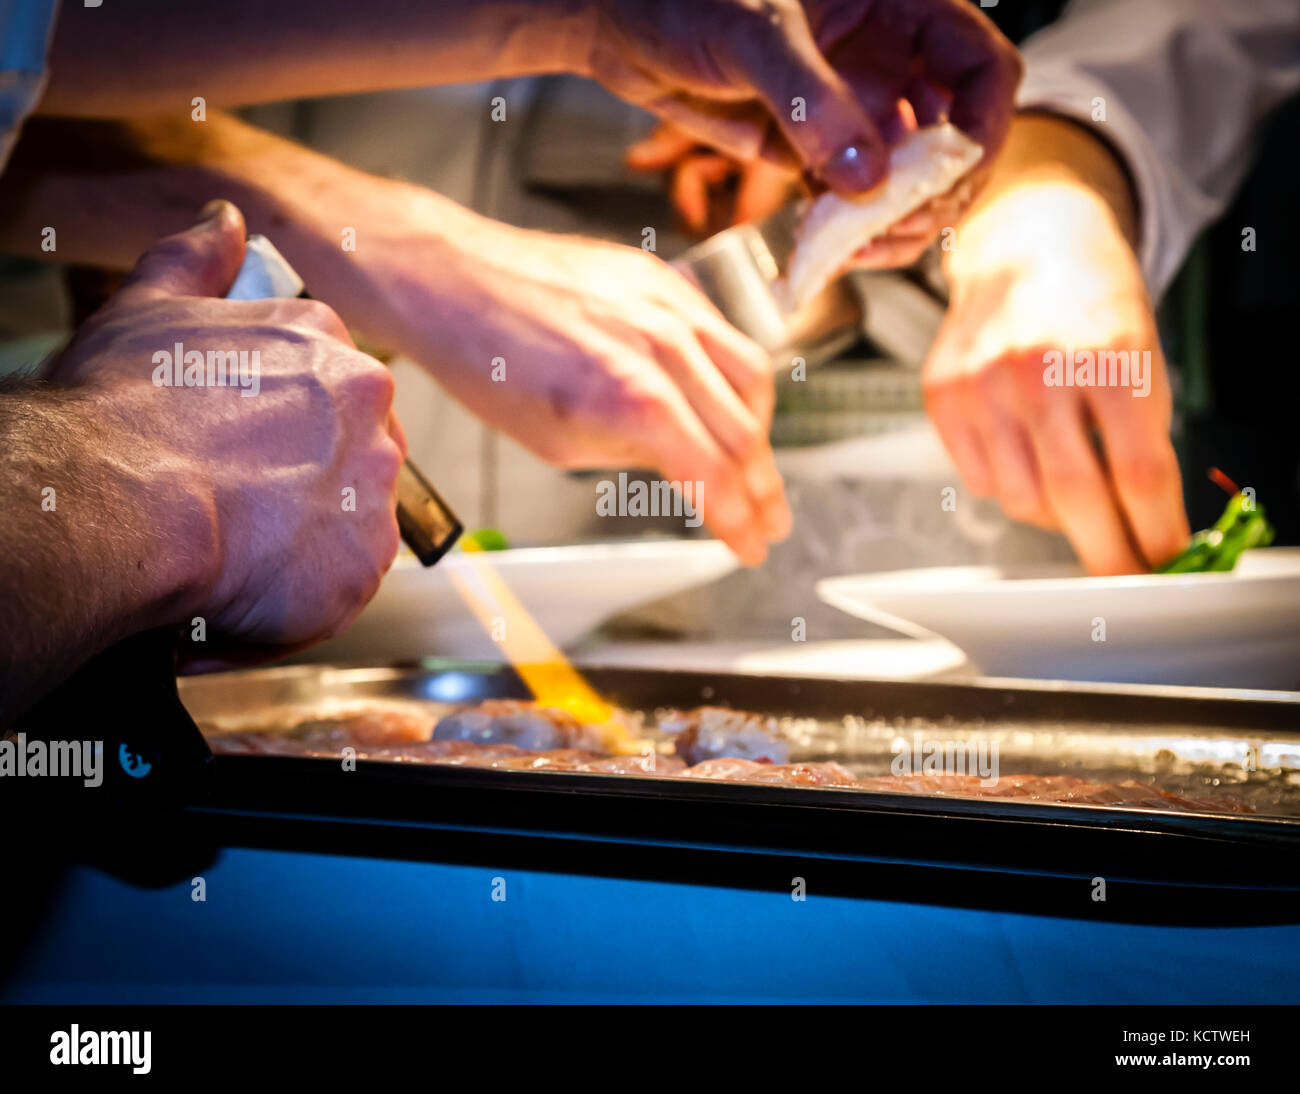 Chef in kitchen cooking with gas burner Stock Photo